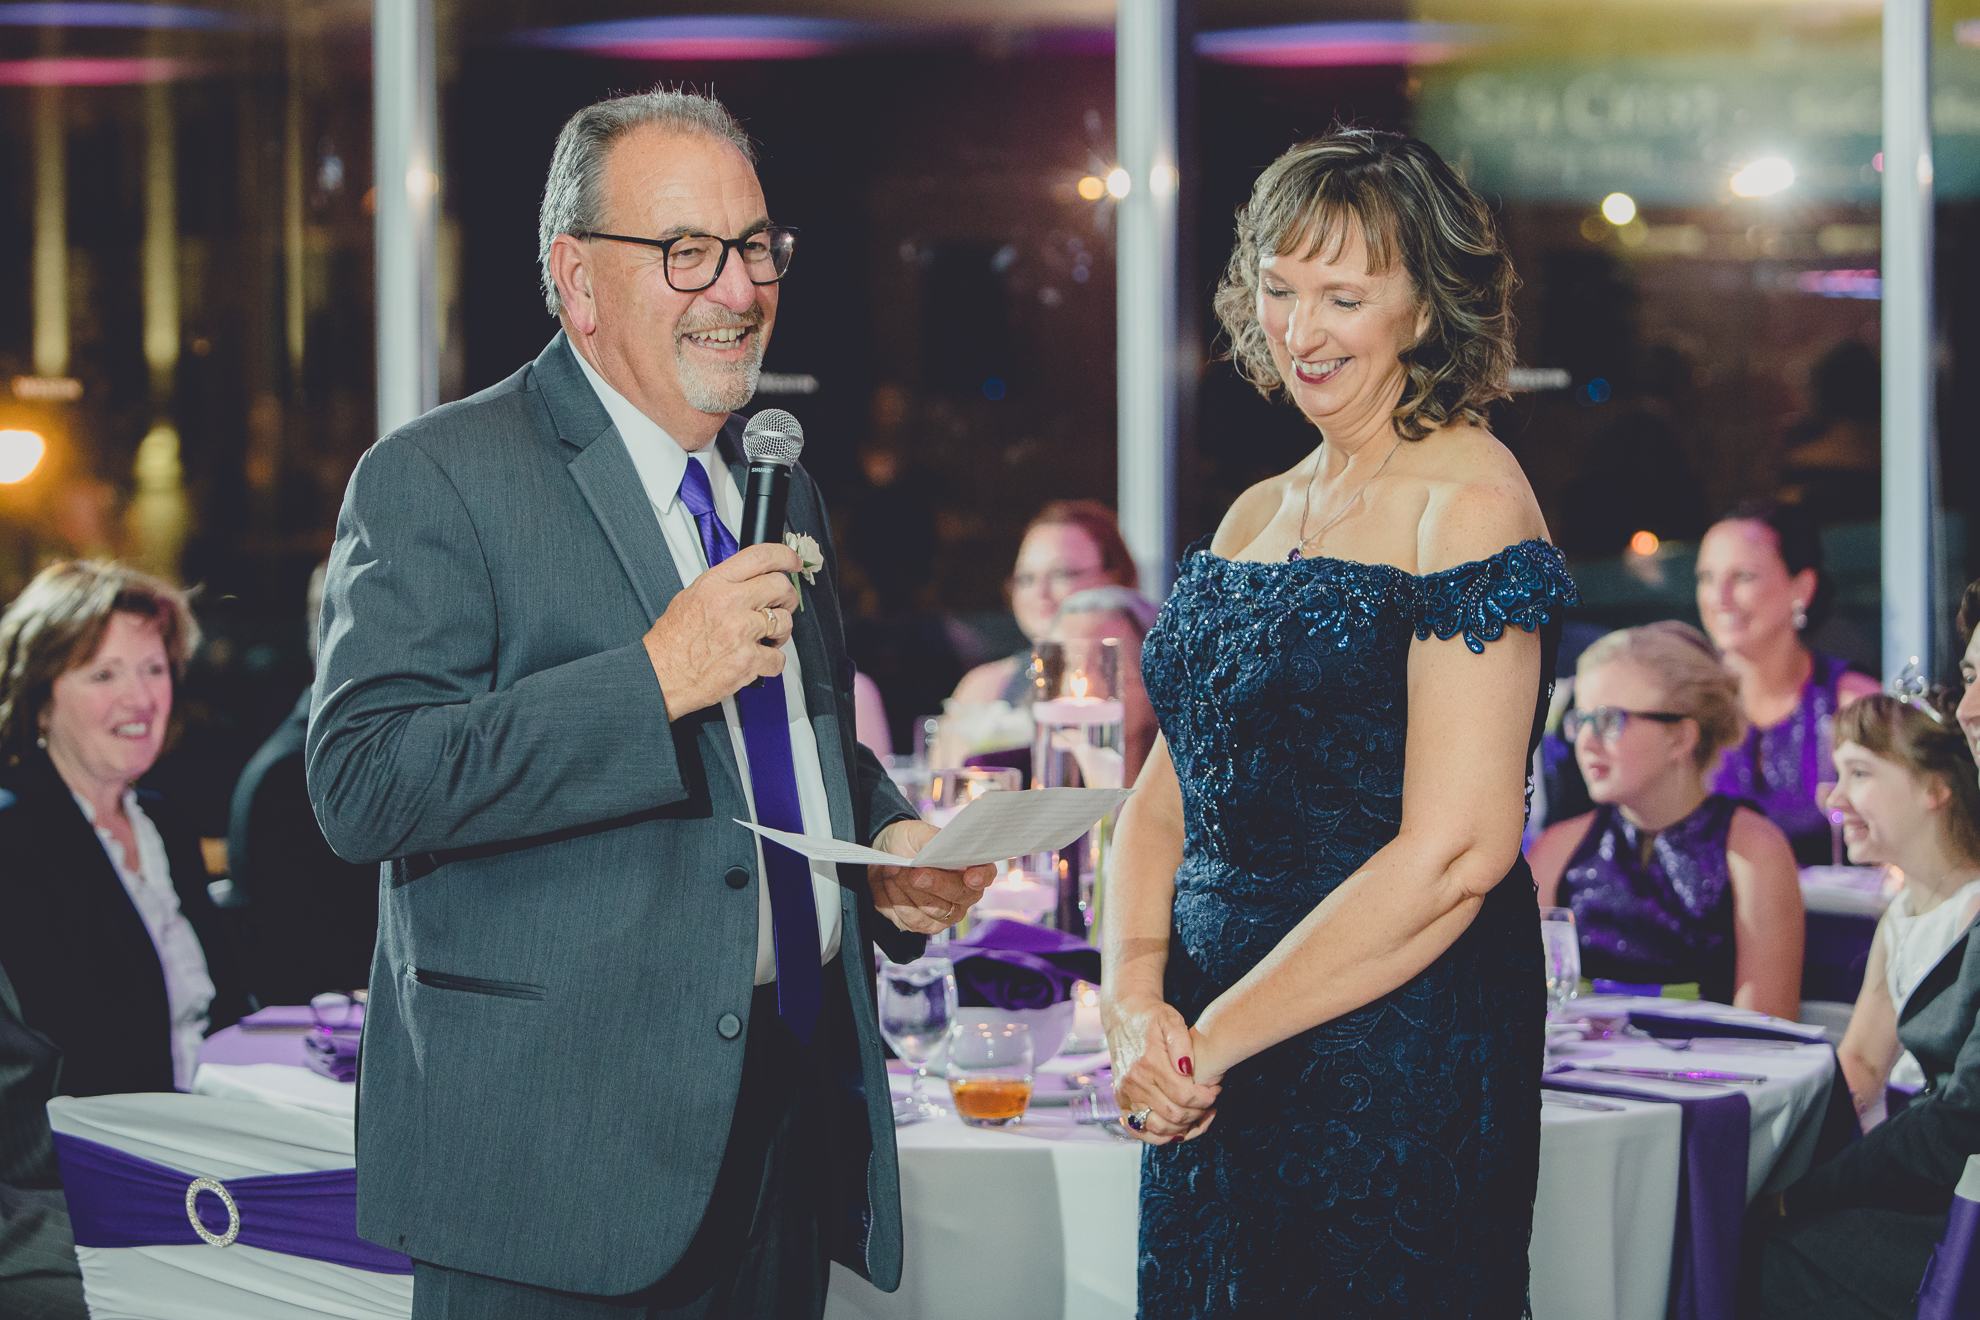 Mom laughs while dad delivers speech during wedding reception at the Westin Hotel in Buffalo, NY